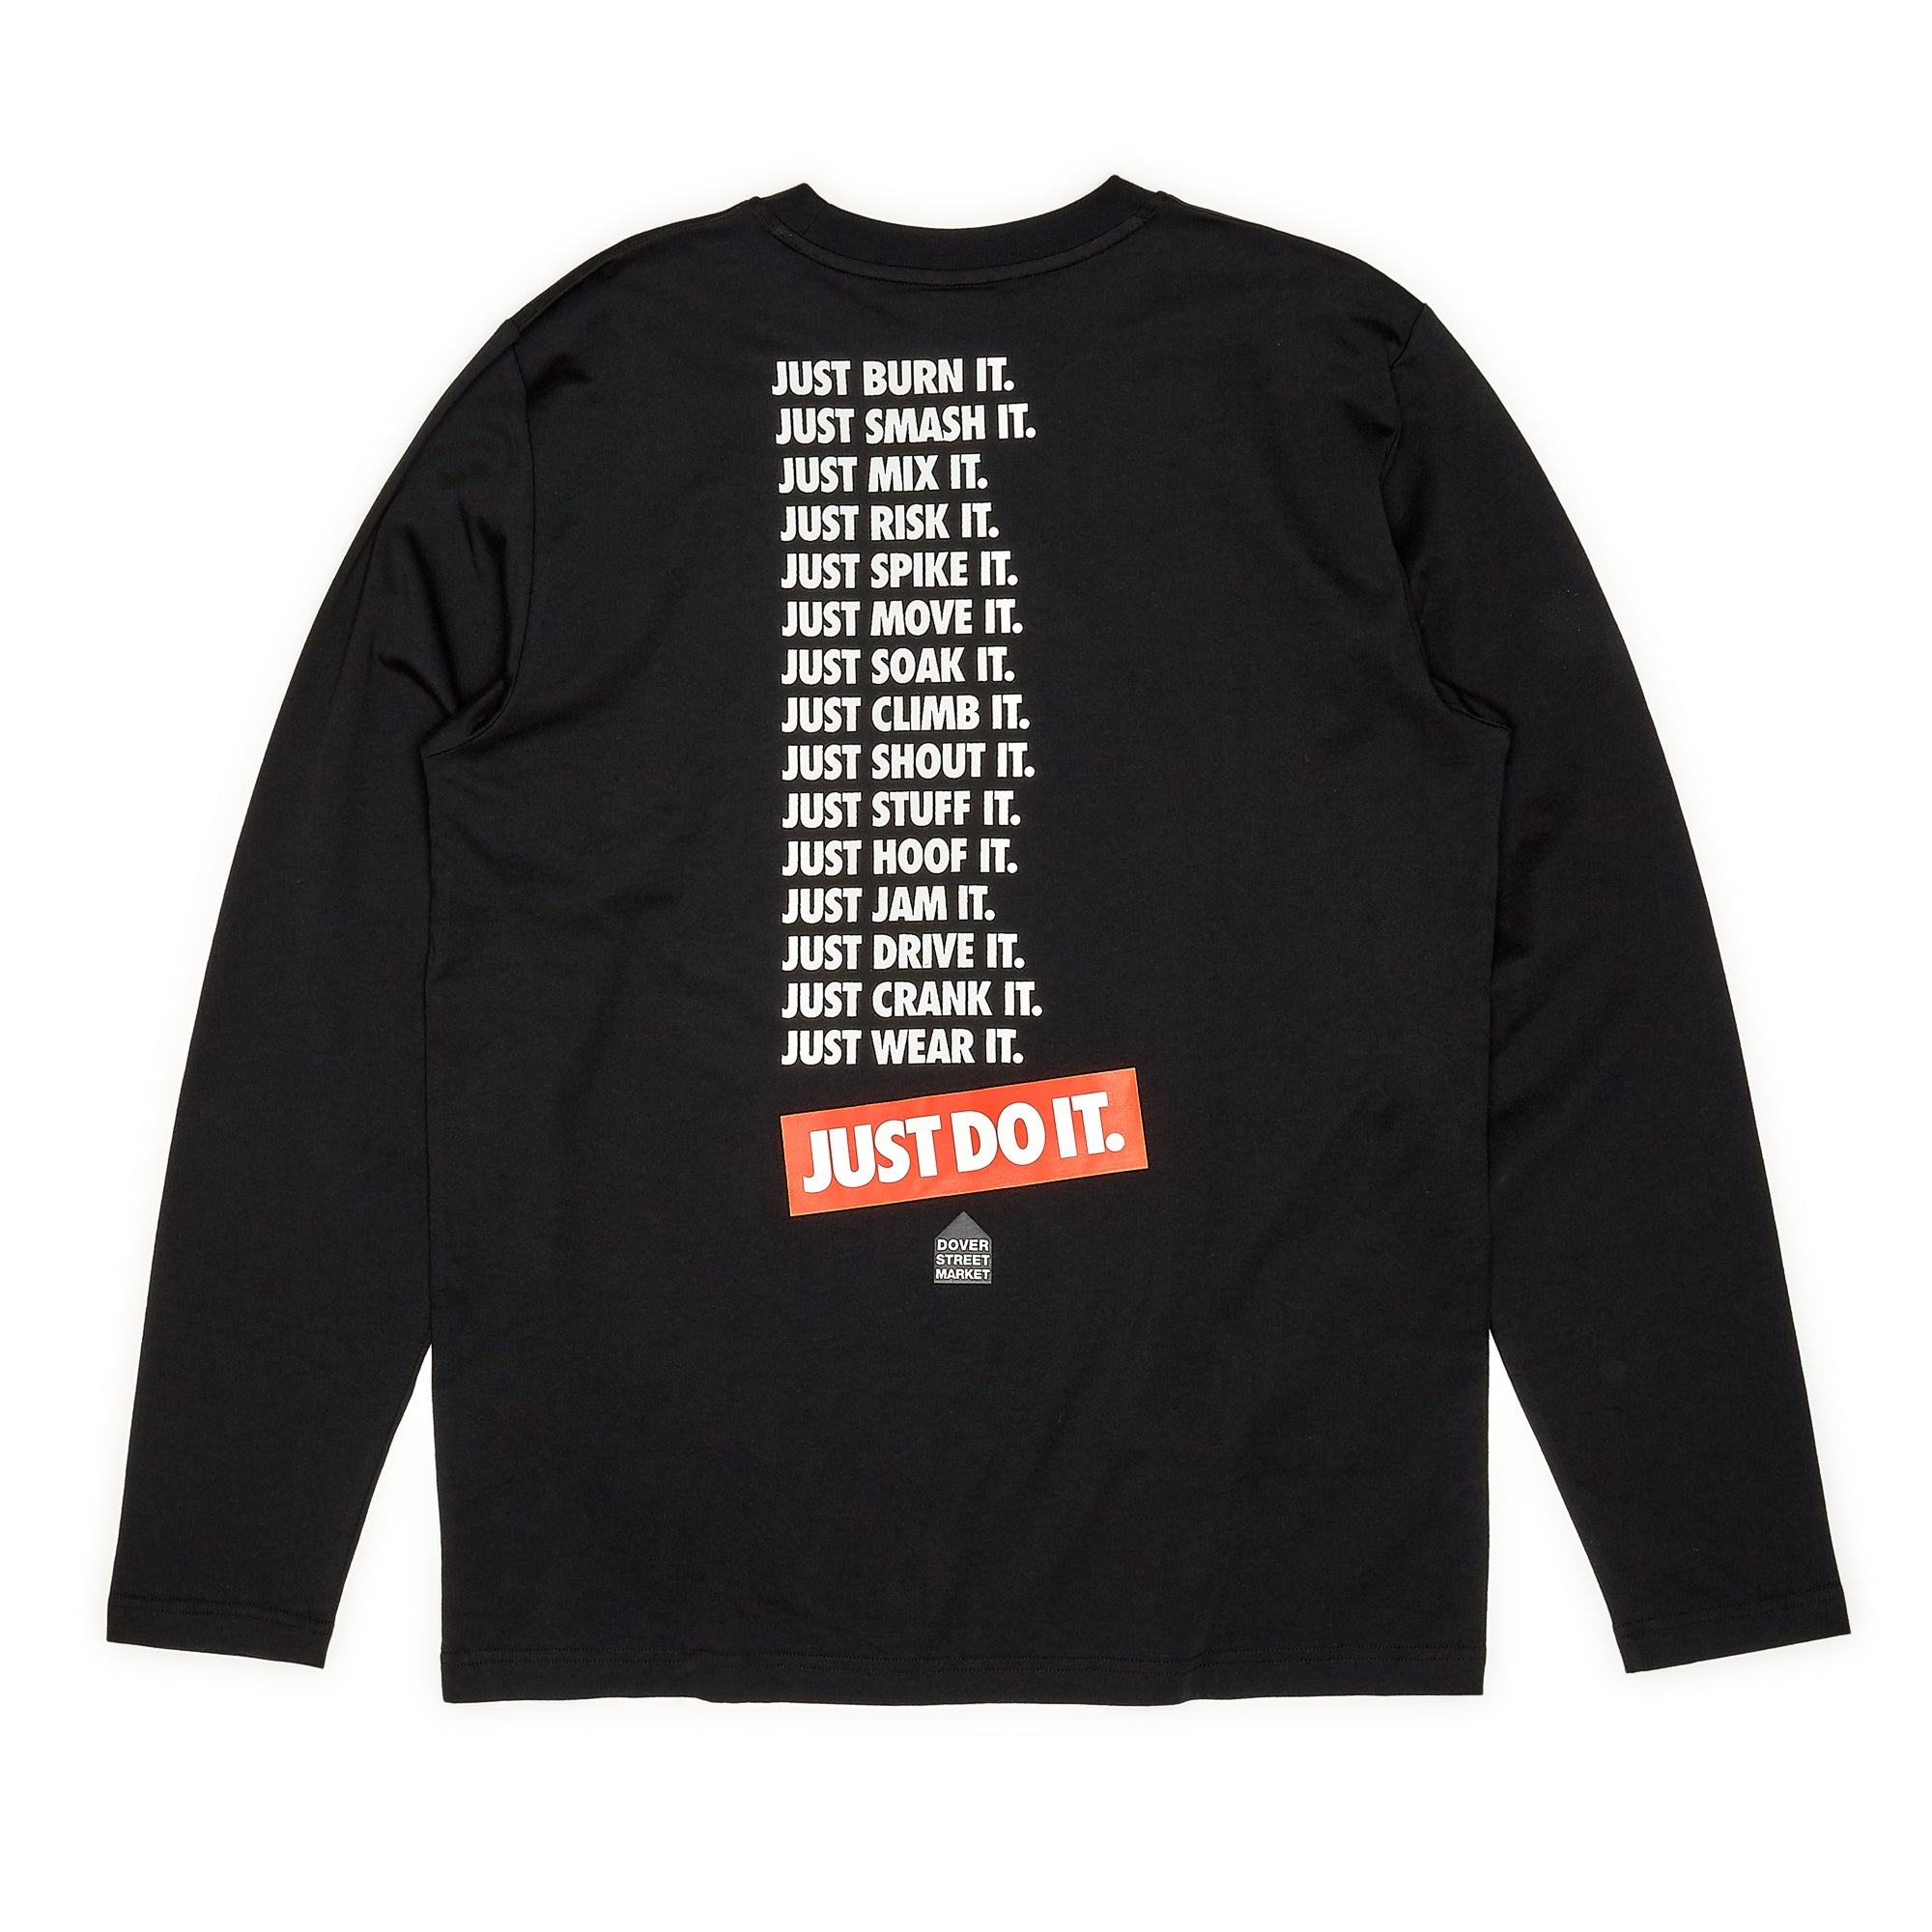 Nike - ’Just Do It’ 30th Anniversary DSM Special Long Sleeve - (Black)